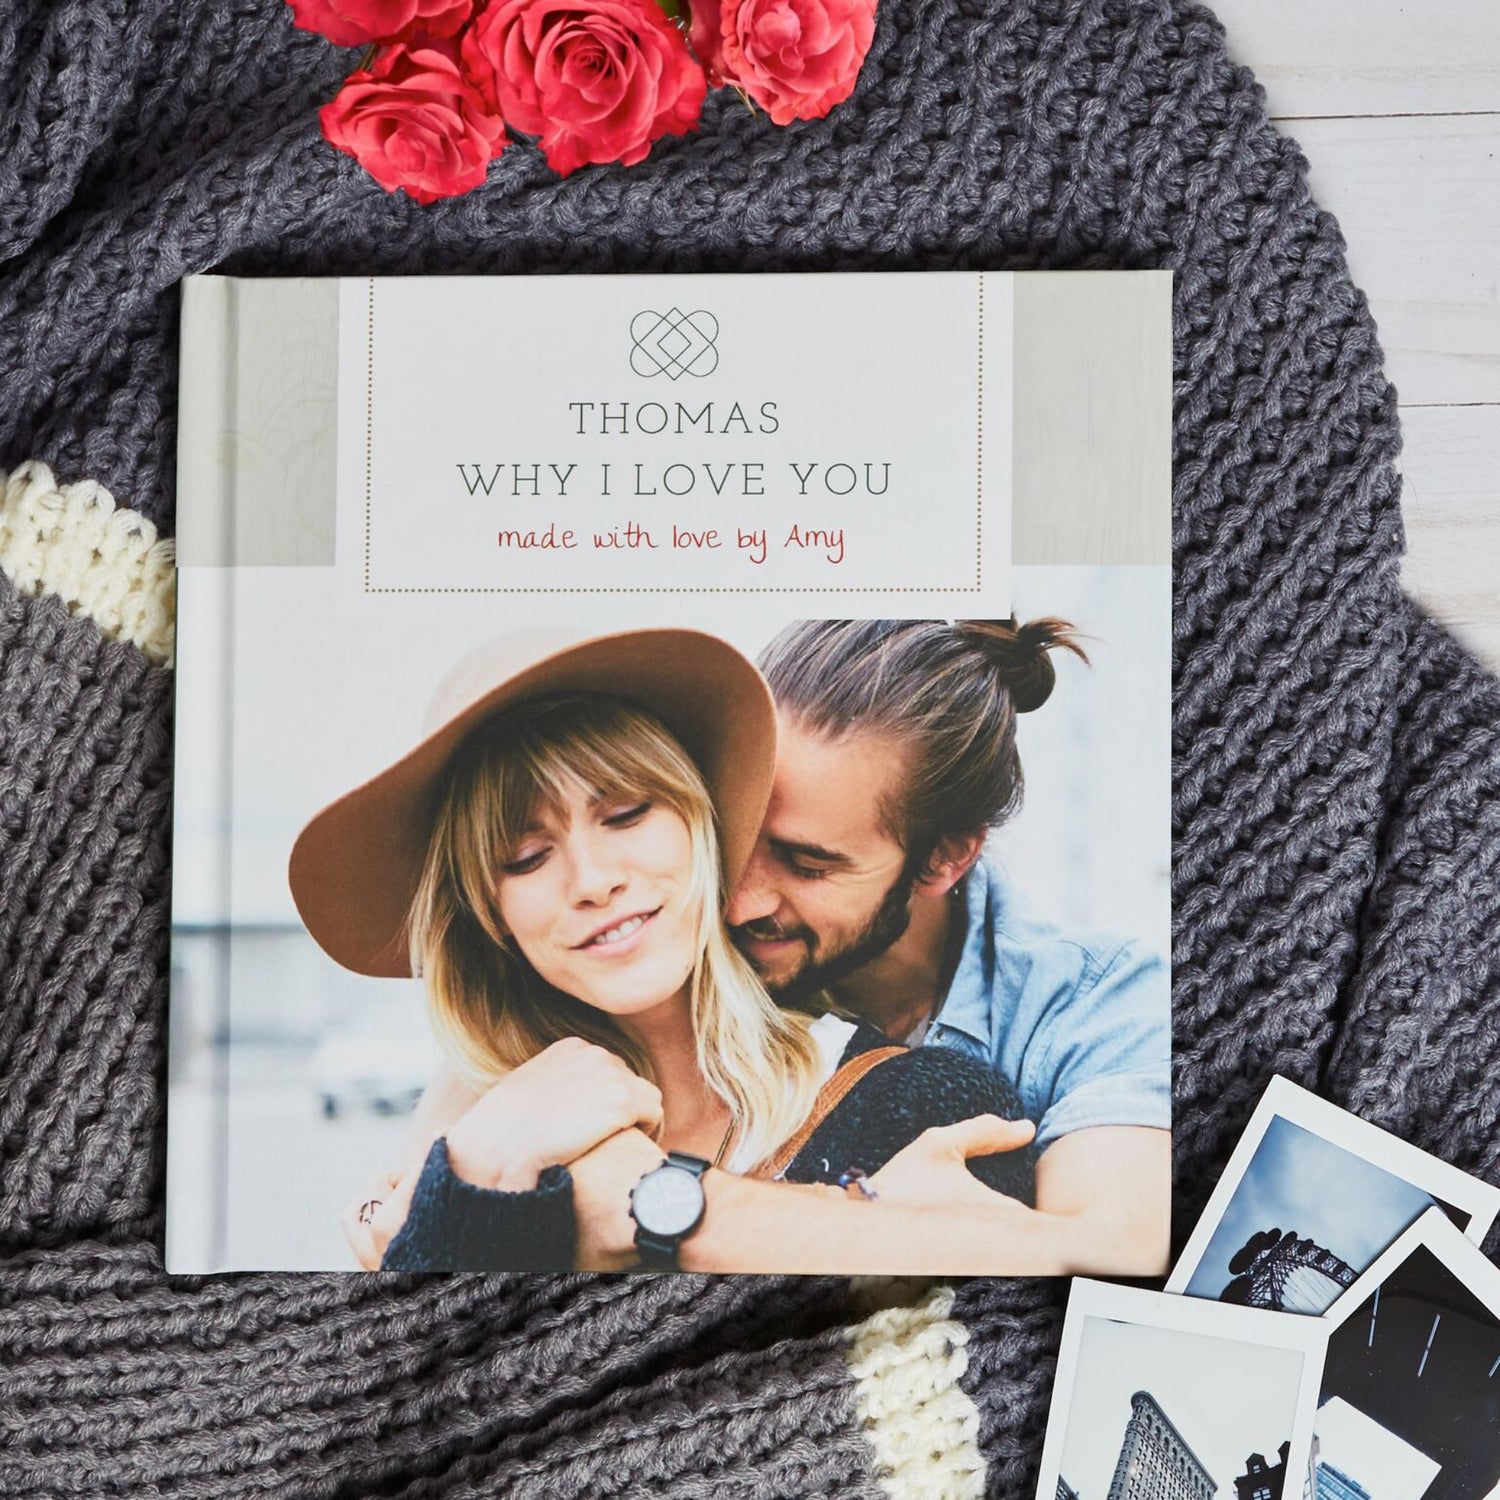 100 Reasons Why I Love You Personalized Book